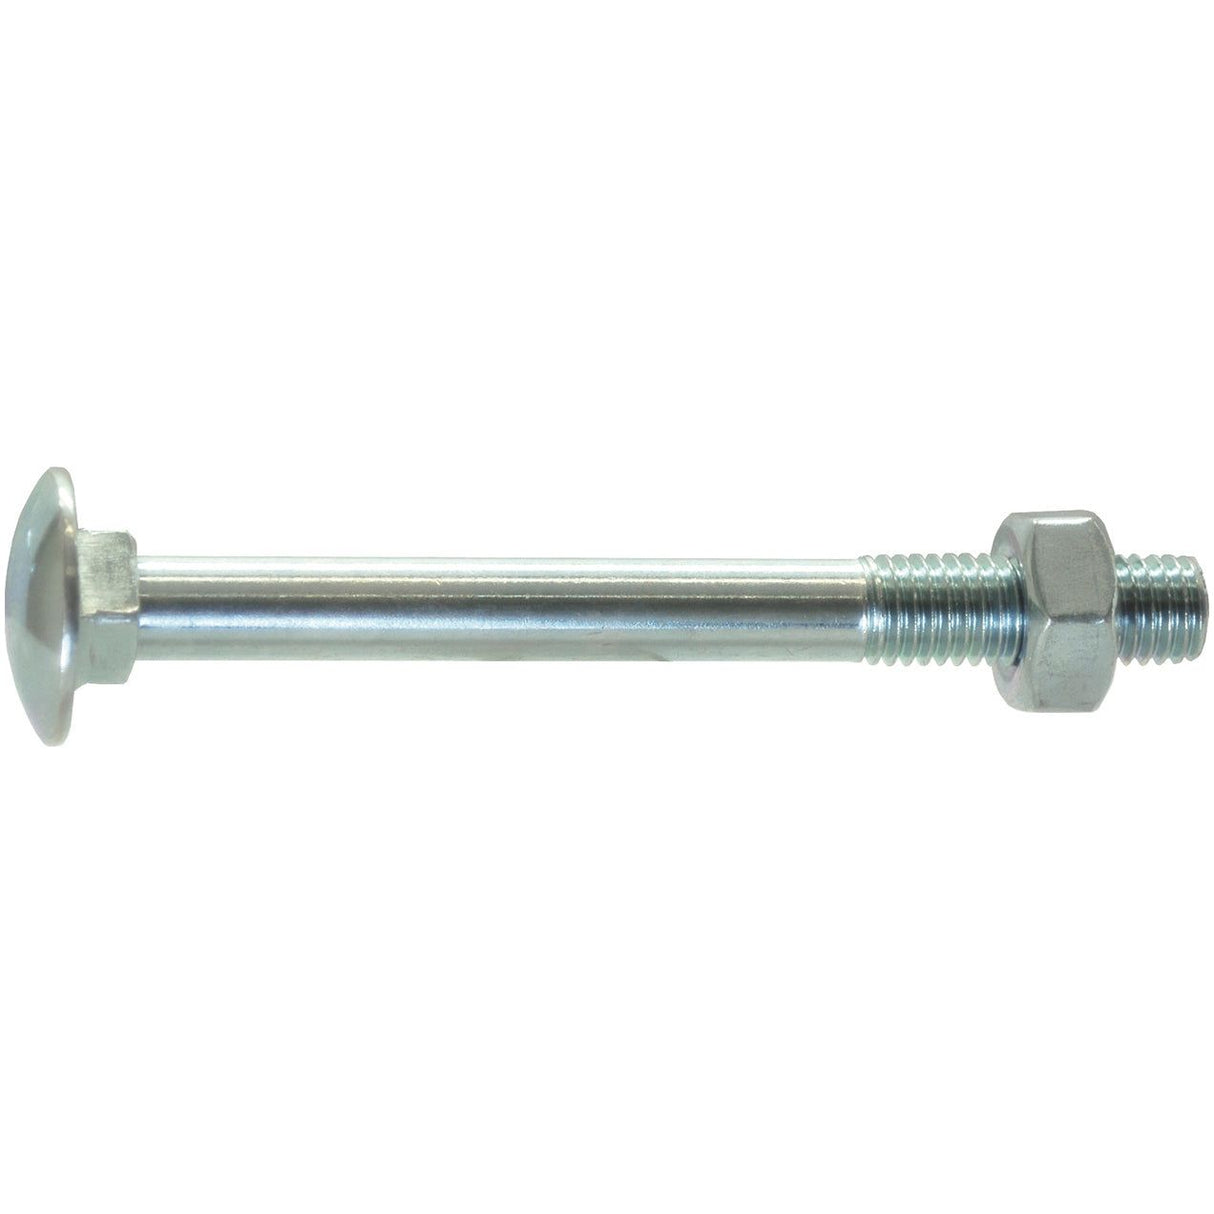 Metric Carriage Bolt and Nut, Size: M12 x 40mm (Din 603/555)
 - S.8297 - Farming Parts